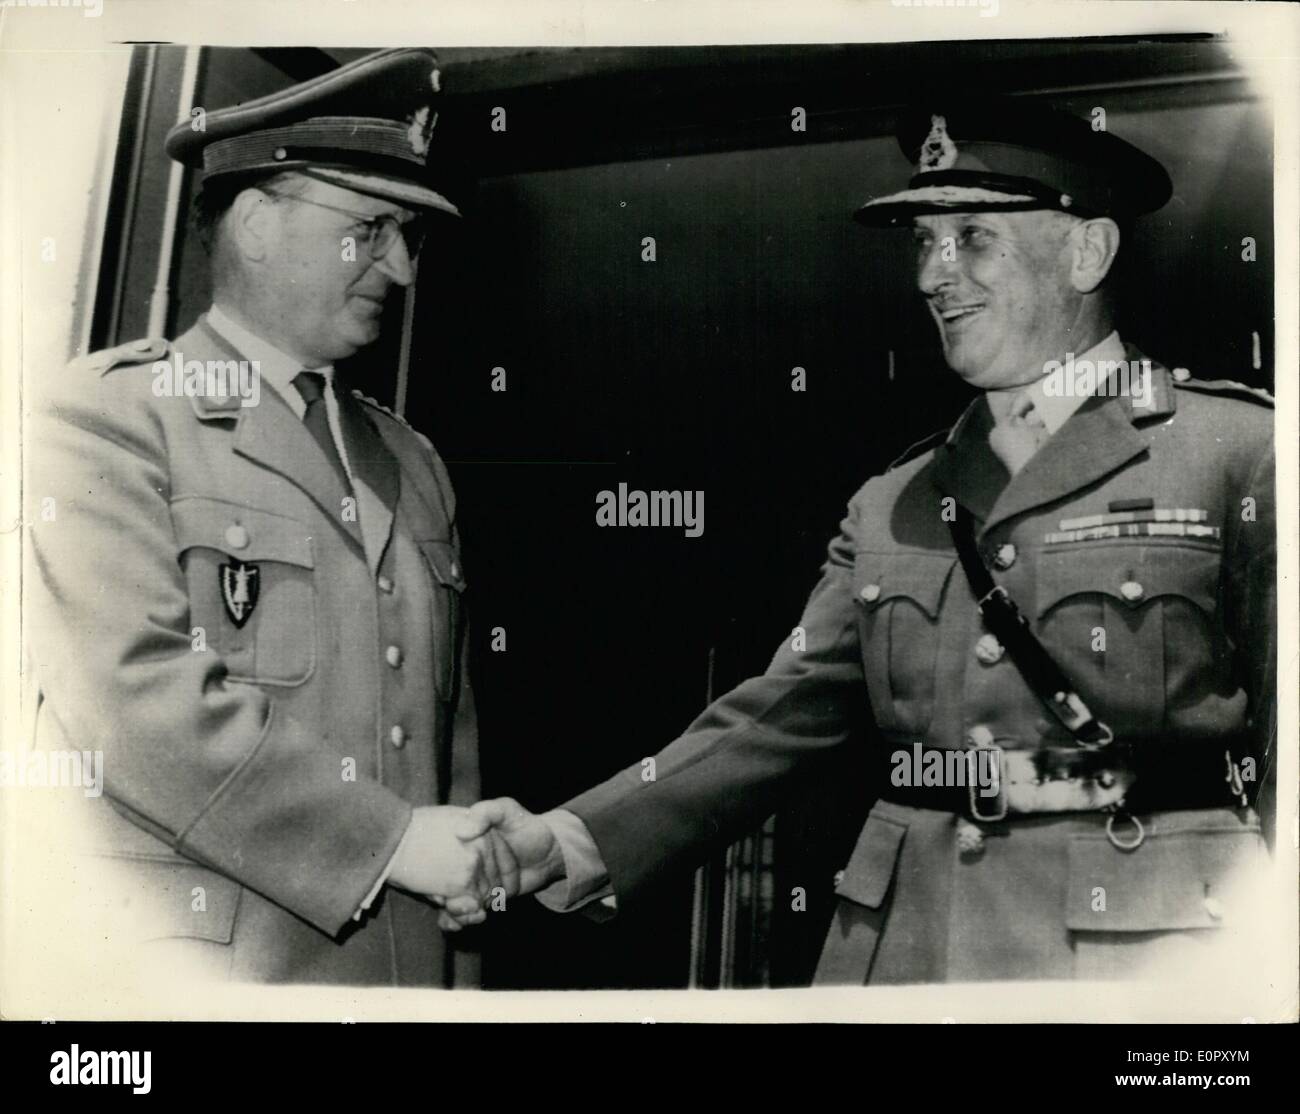 Jun. 18, 1957 - 18.6.57 General Speidel visits NATO H.Q. in Germany. Hans Speidel, the German Commander of Allied Land Forces, Central Europe. who has just been promoted from Lieut-General to General, today paid his first official visit to NATO headquarters at Munchen-Gladbach, which is under the command of General Sir Dudley Ward, C-in-C British Rhine Army. Keystone Photo Shows: General Speidel (left) shakes hands with General Sir Dudley Ward, at Munchen-Gladbach today. Stock Photo